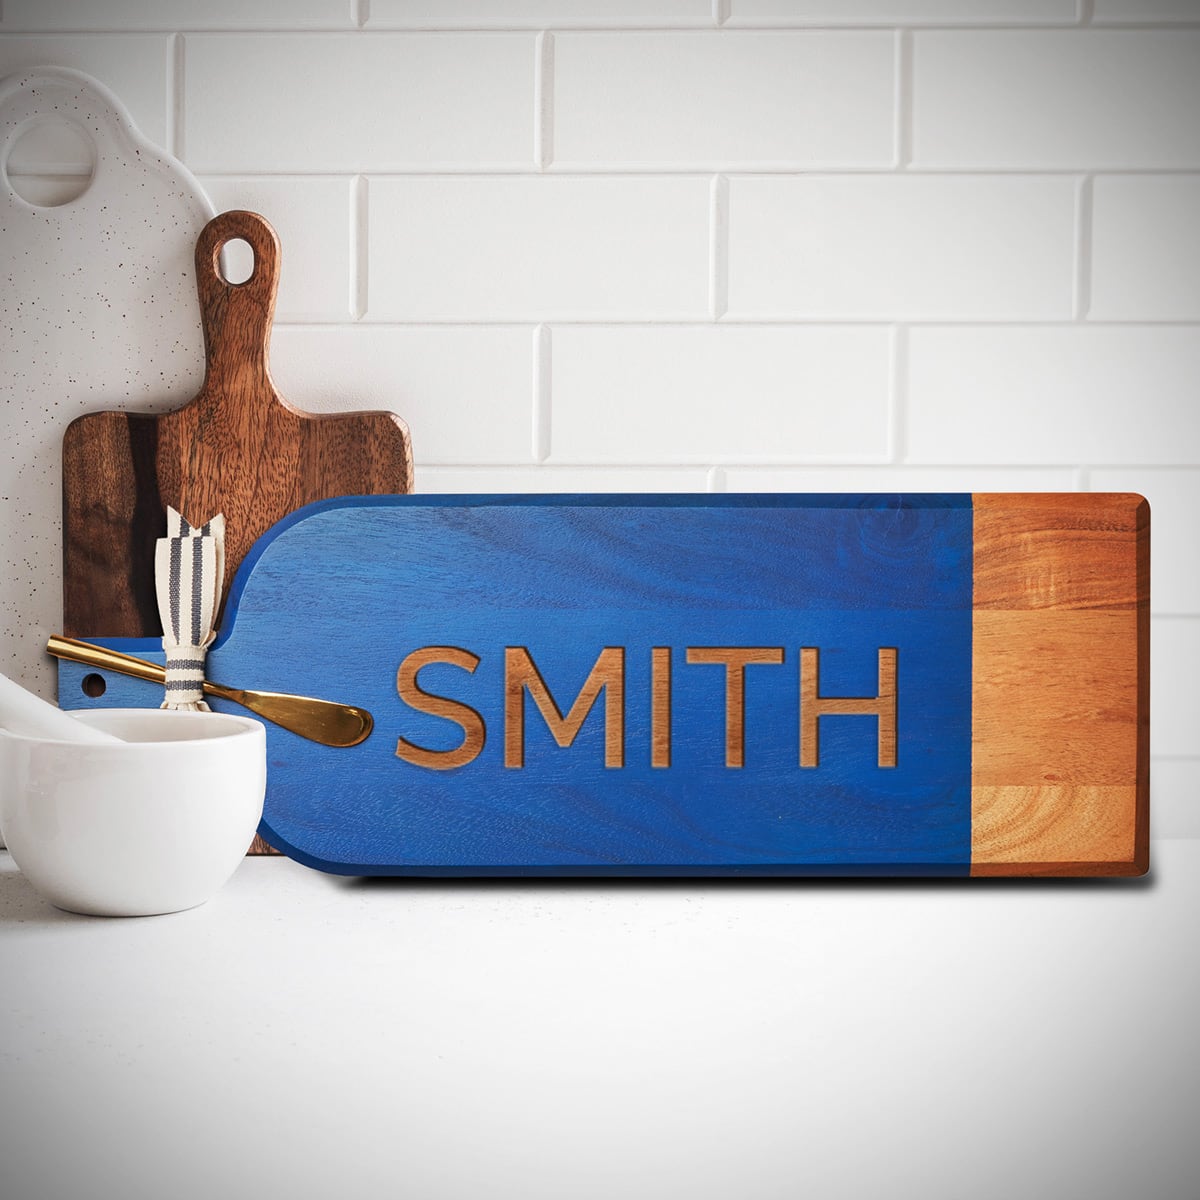 Azure Personalized Charcuterie Board with Spreader Knife